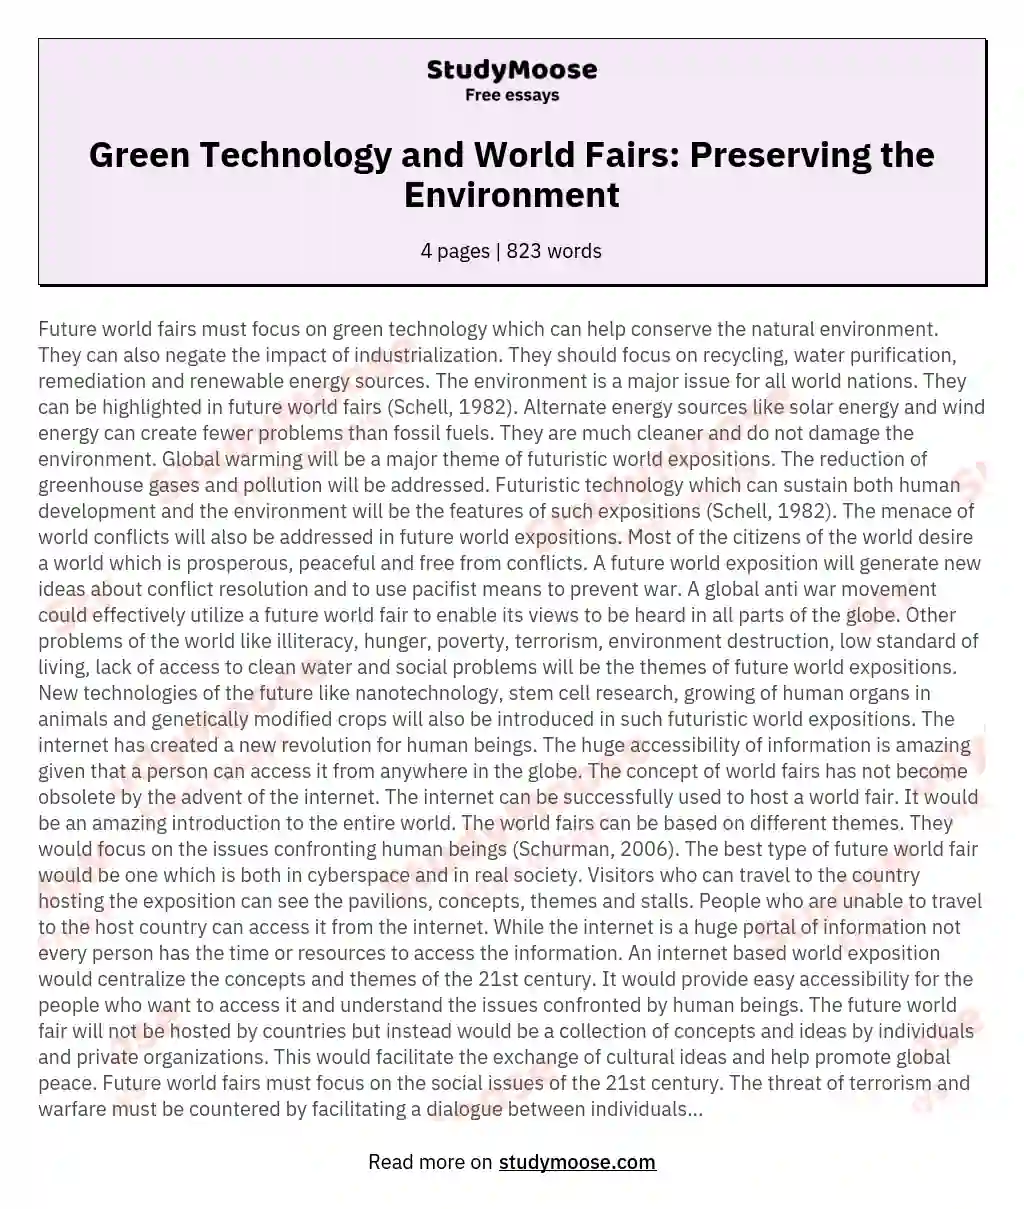 Green Technology and World Fairs: Preserving the Environment essay